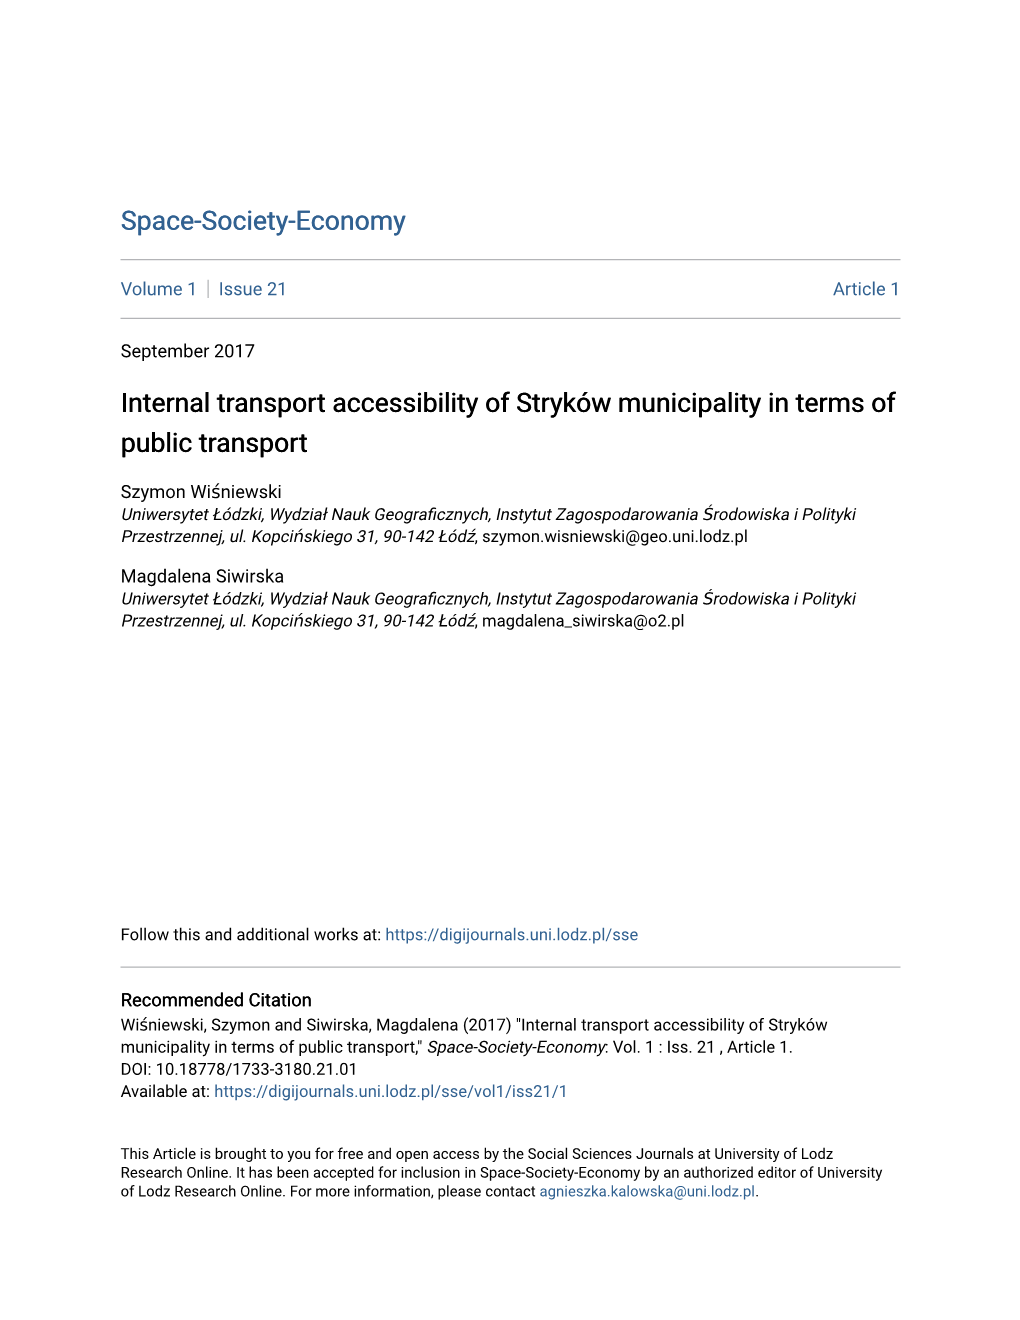 Internal Transport Accessibility of Stryków Municipality in Terms of Public Transport